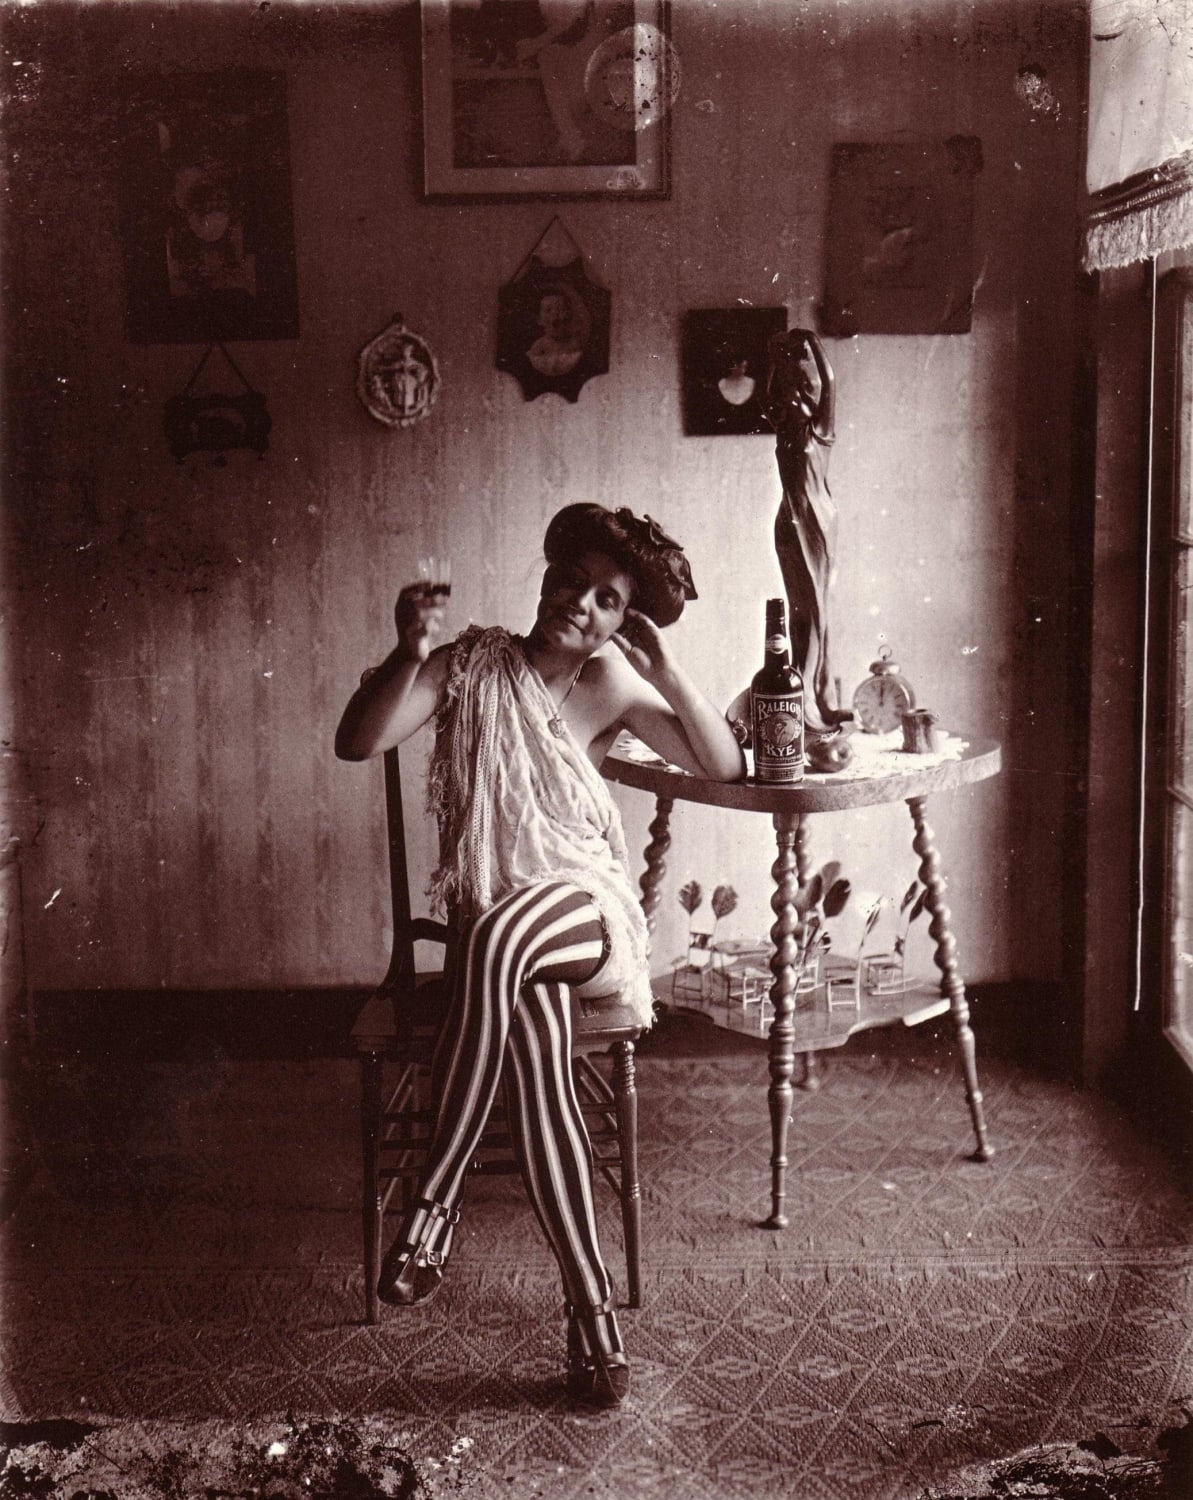 Prostitute at a Storyville, New Orleans brothel in 1912, the only legalized red-light district in North America until it was shut down in 1917.